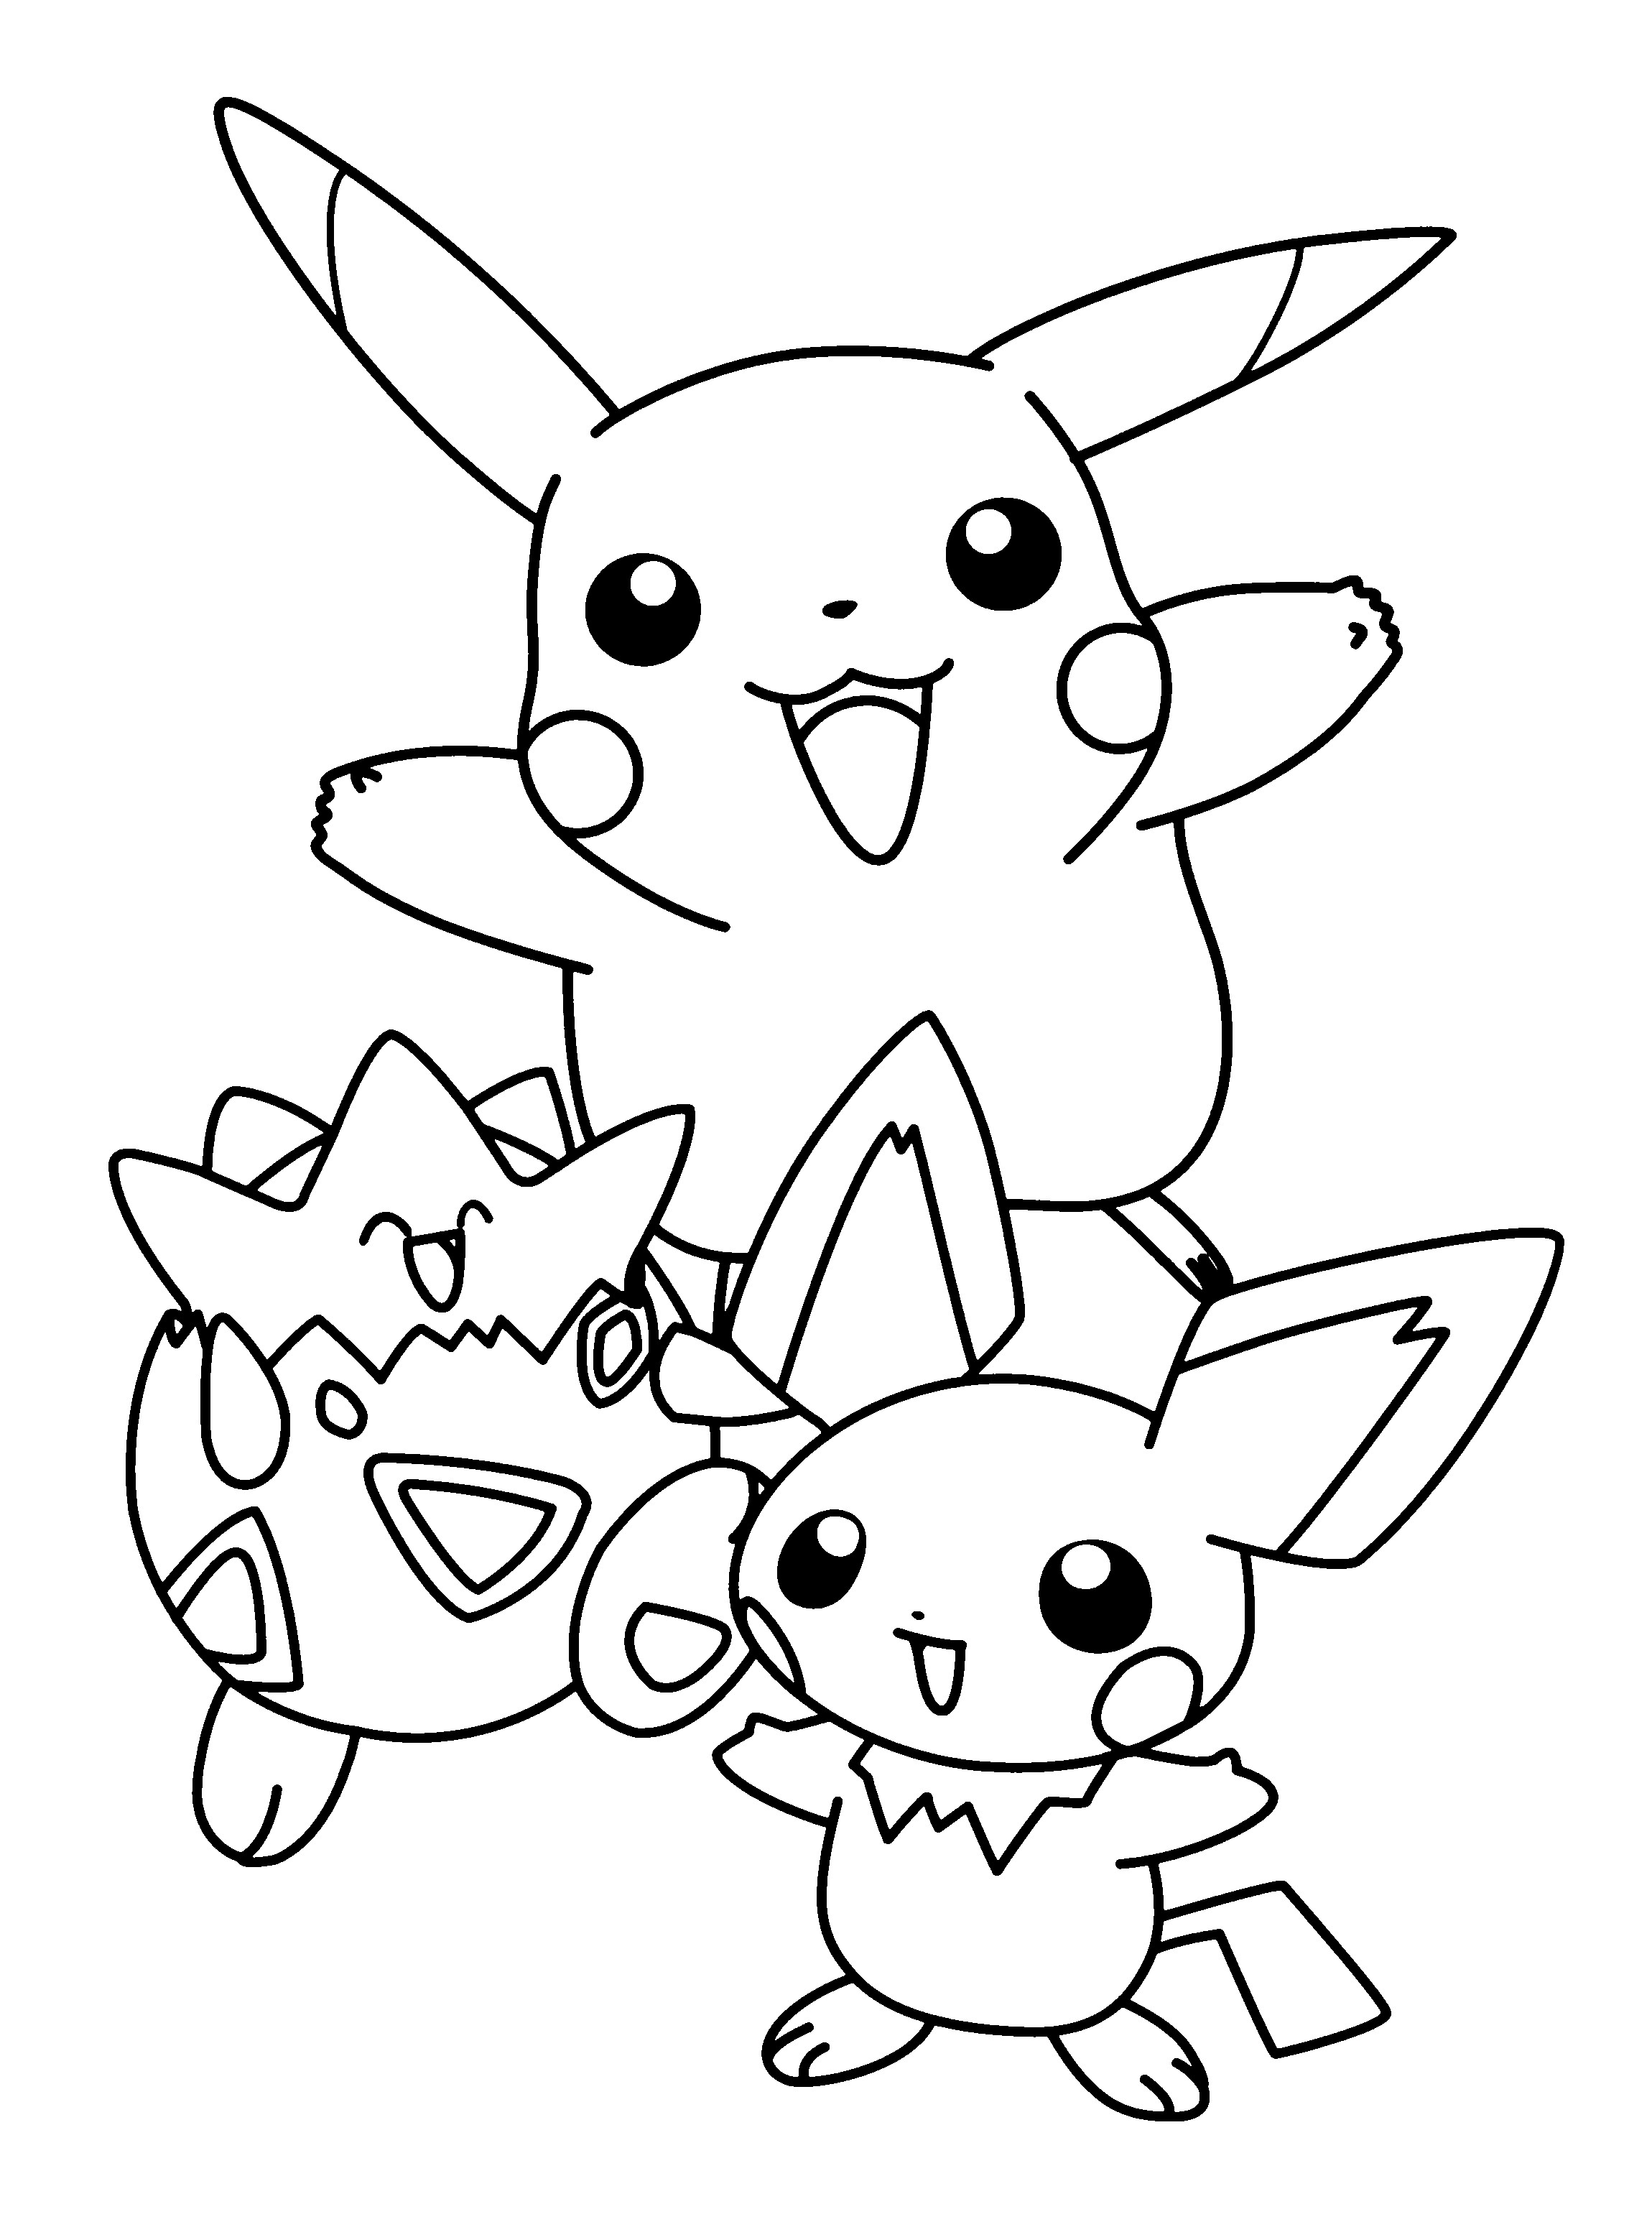 Pokemon Coloring Pages – Google Search